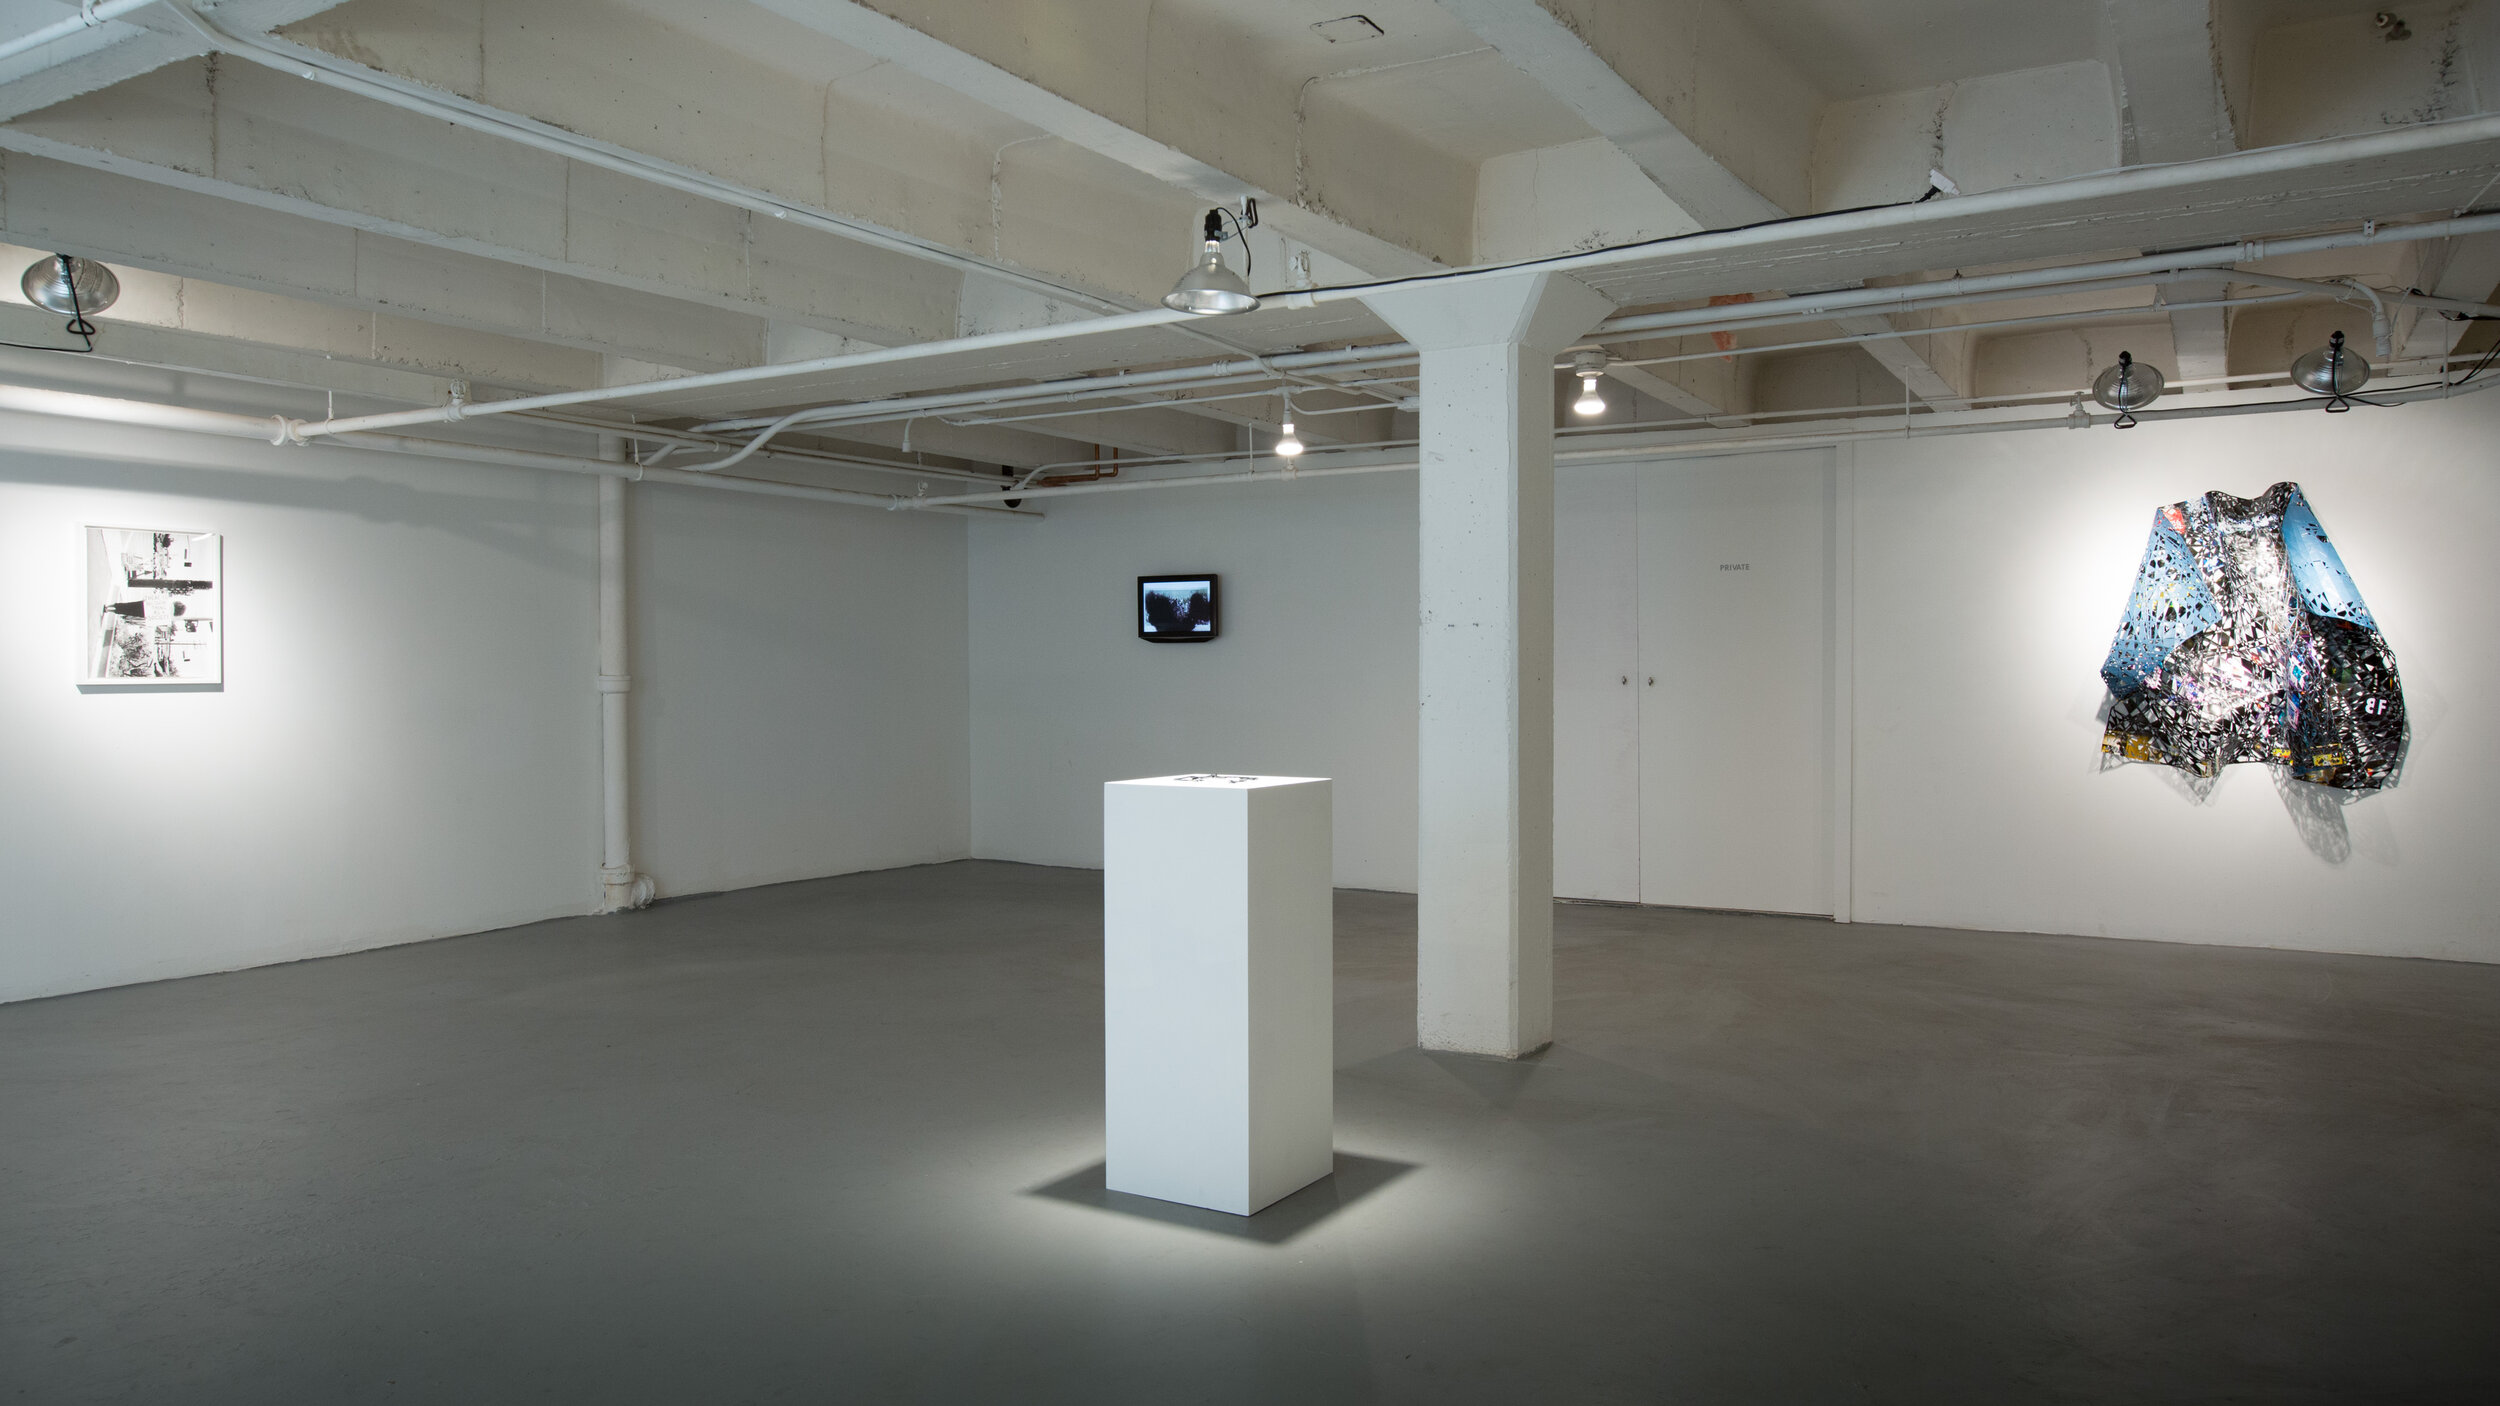   Material Object , curated by Justin Cole, In Installation at CJG, May 2014 